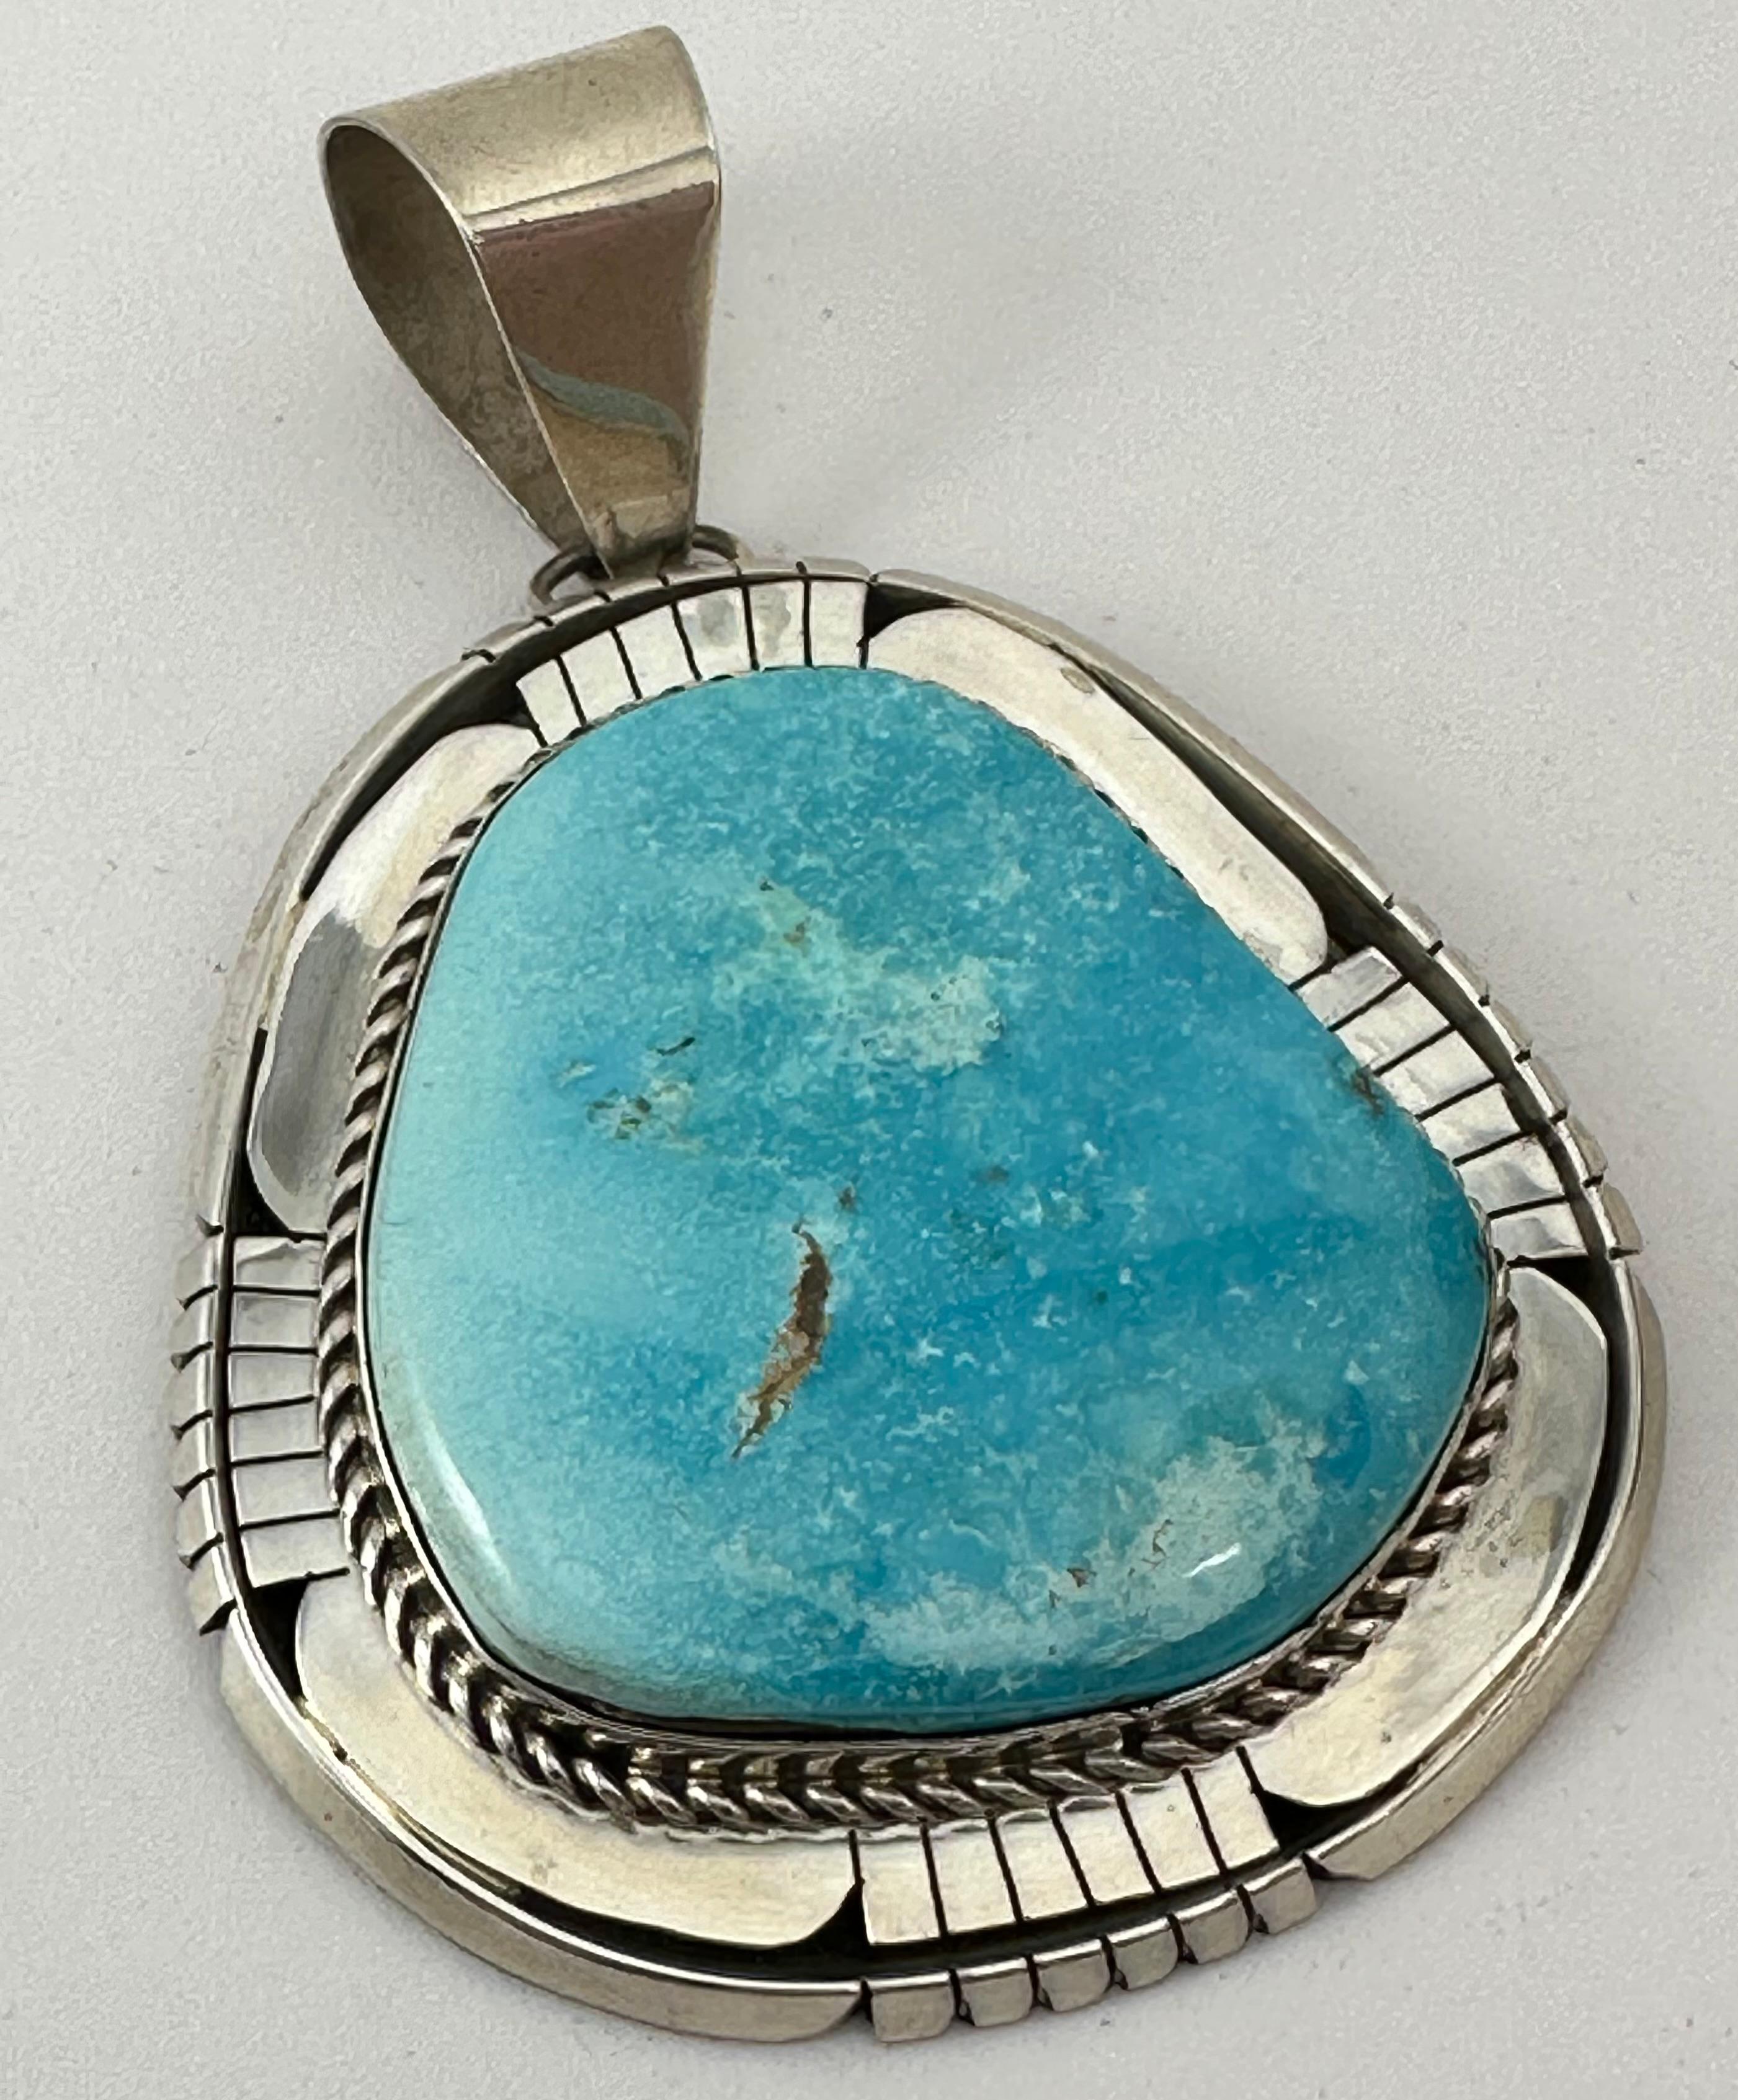 Cabochon Sterling Silver Sleeping Beauty Turquoise Pendant by Navajo Artist Betta Lee For Sale